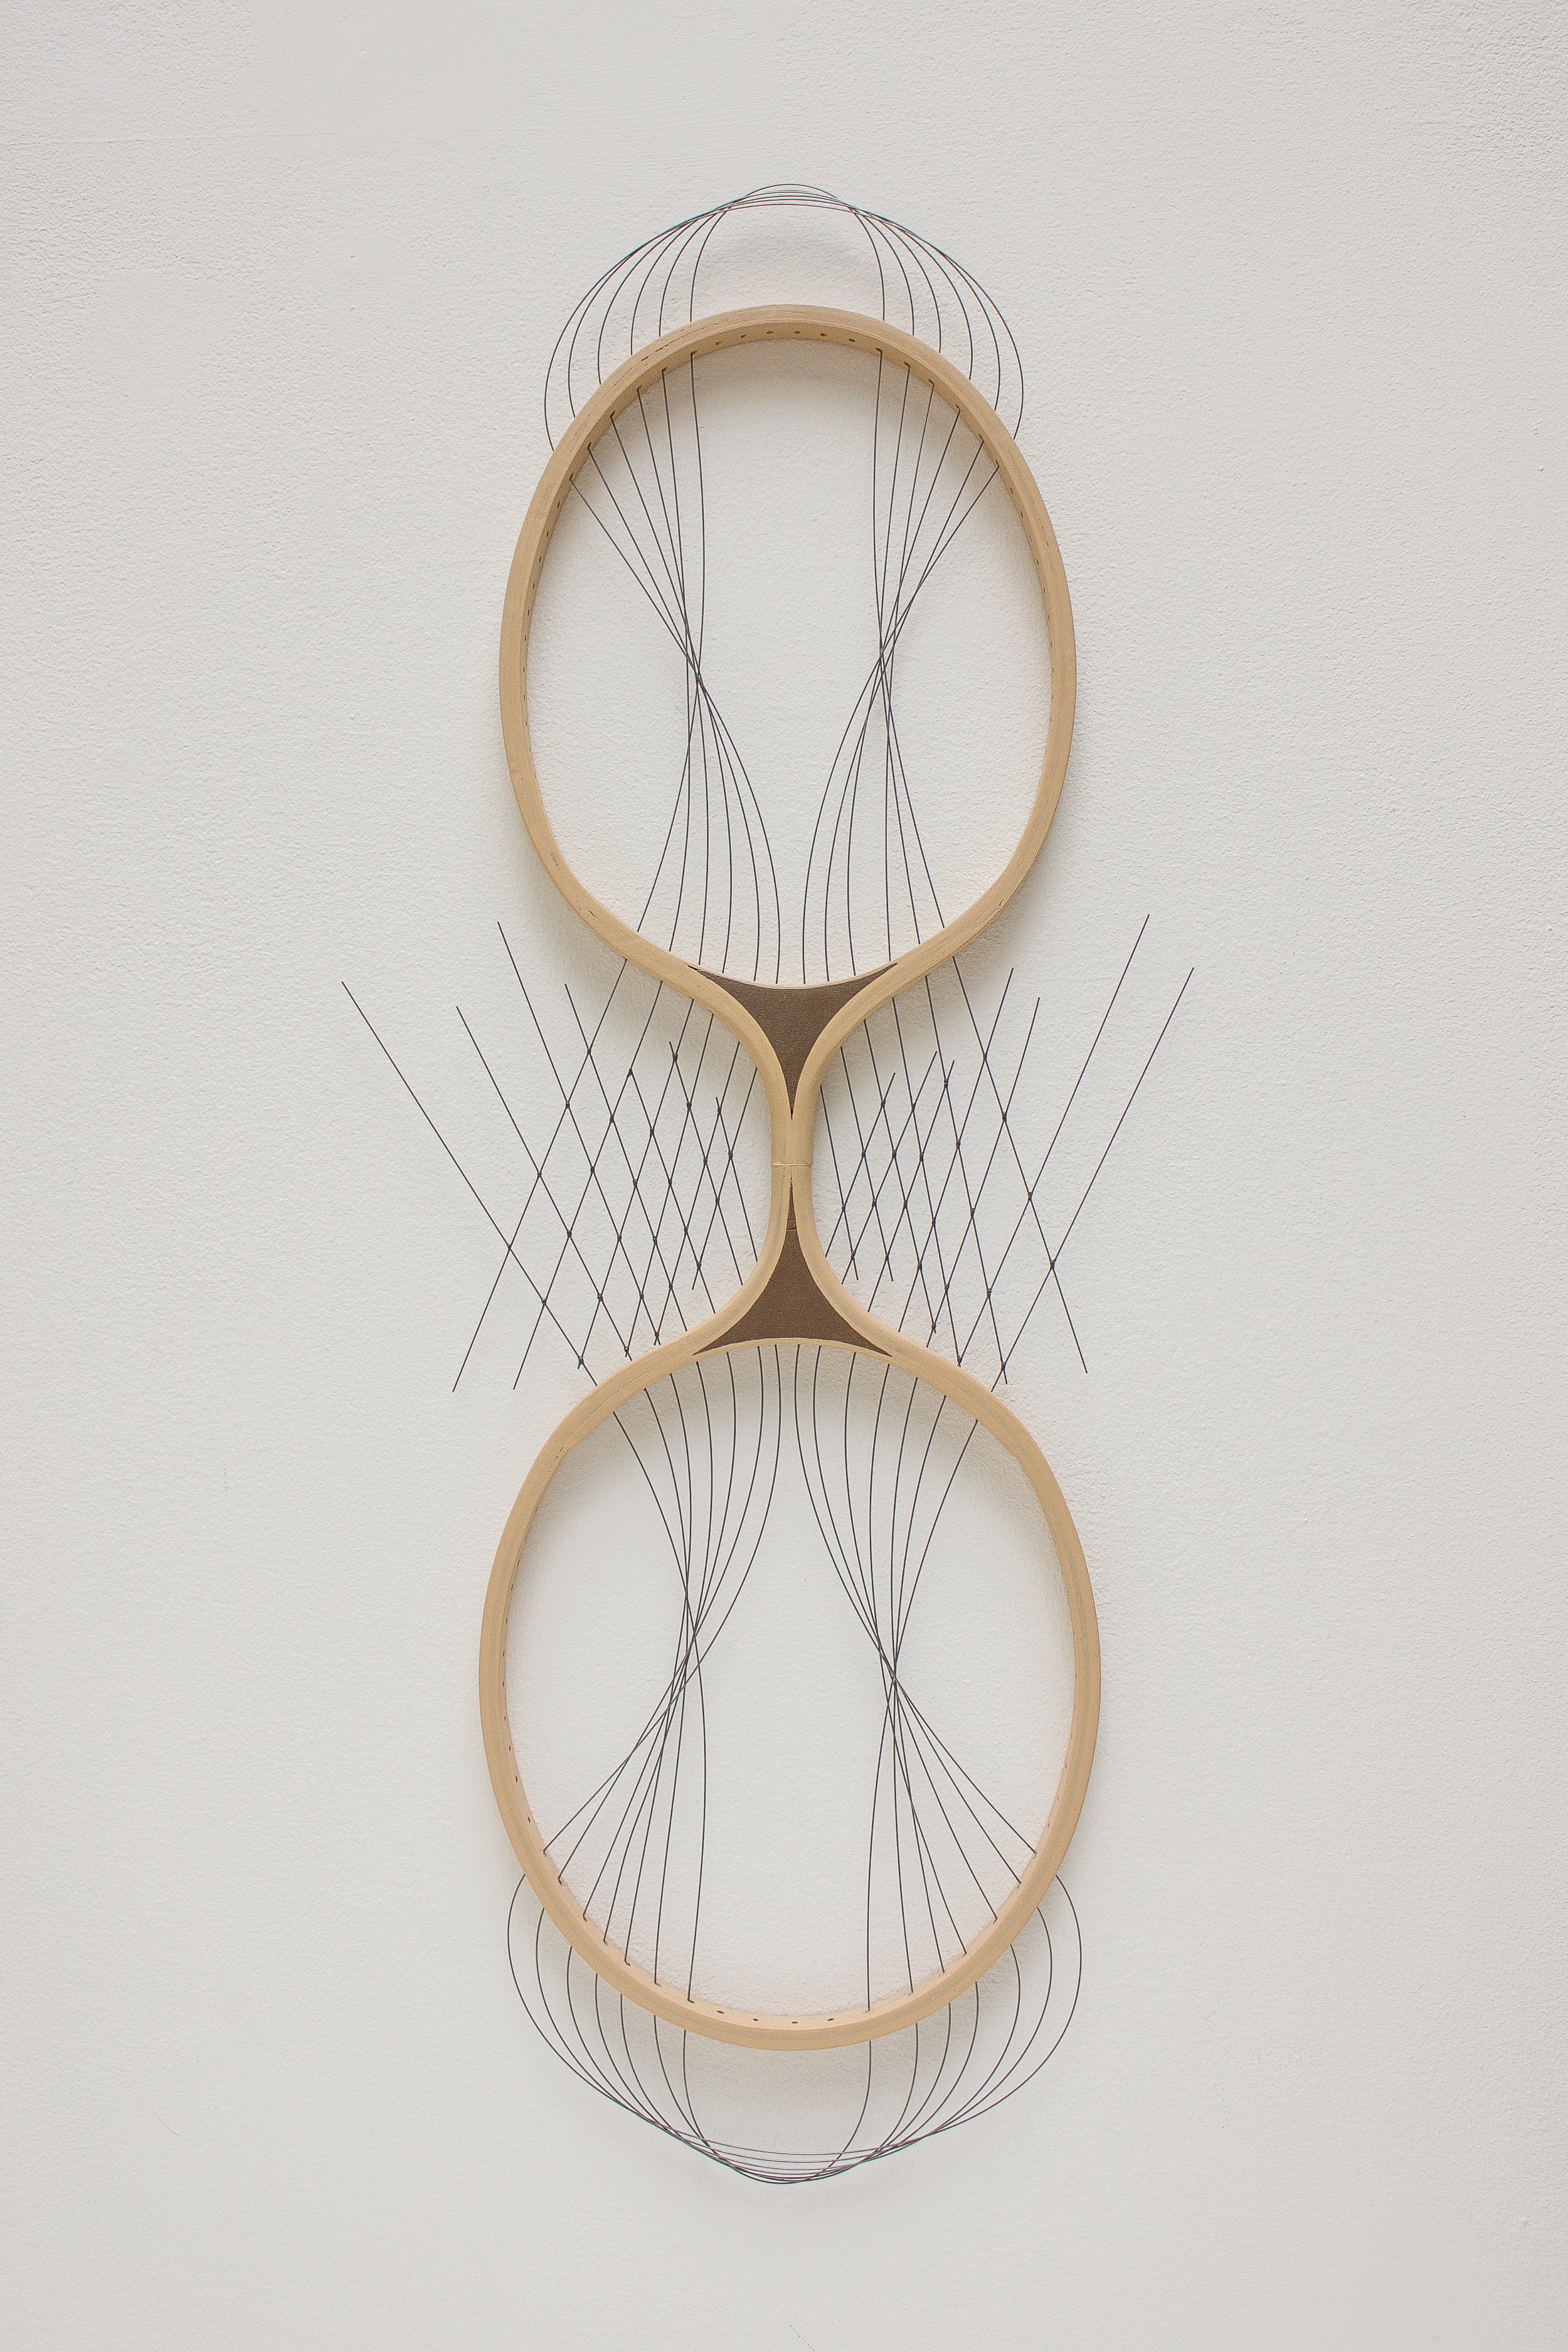   Instrument  Badminton rackets, piano wire, acrylic, adhesive 26" x 10" x 1" / 2013 Private Collection 